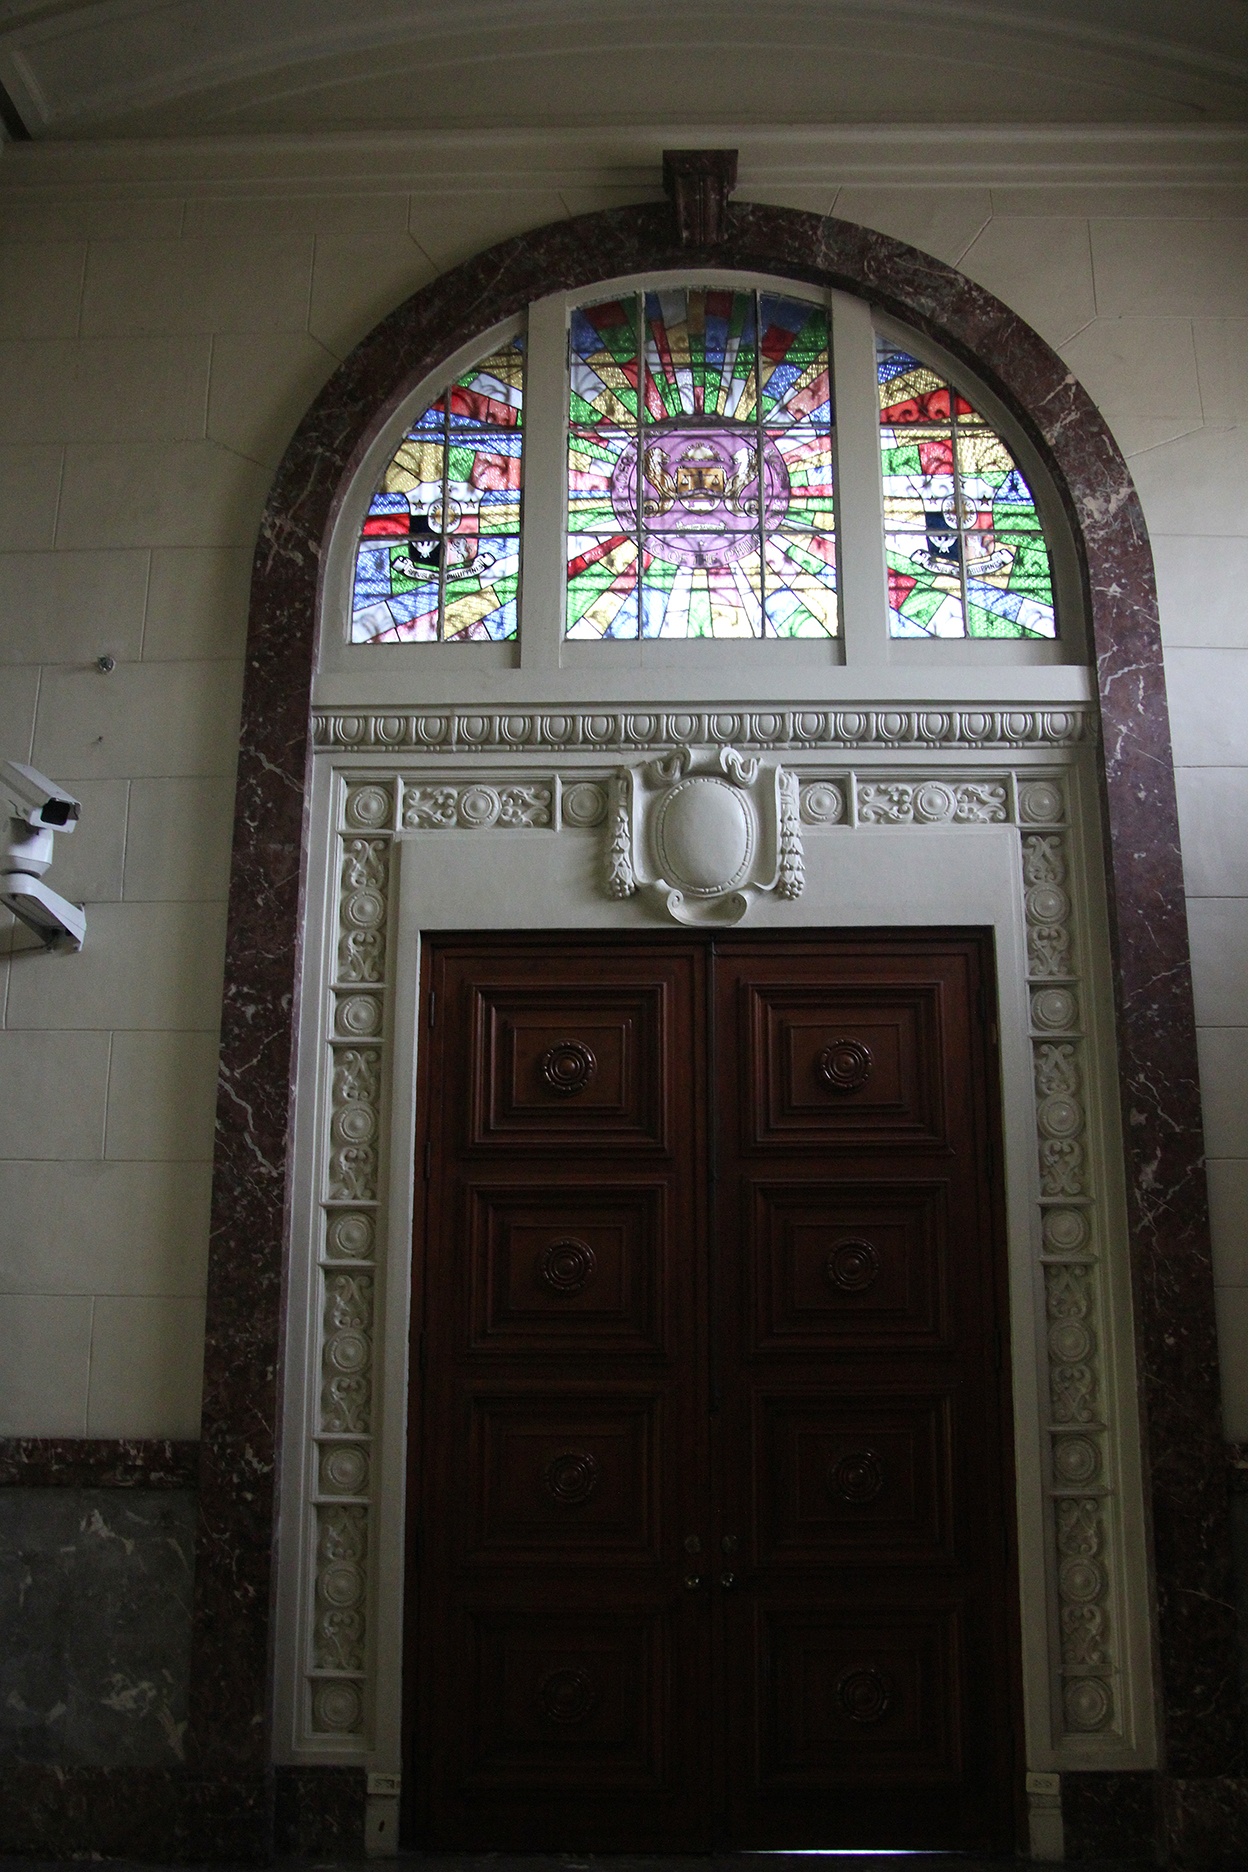 Stained glass window over the door of Marble Hall.